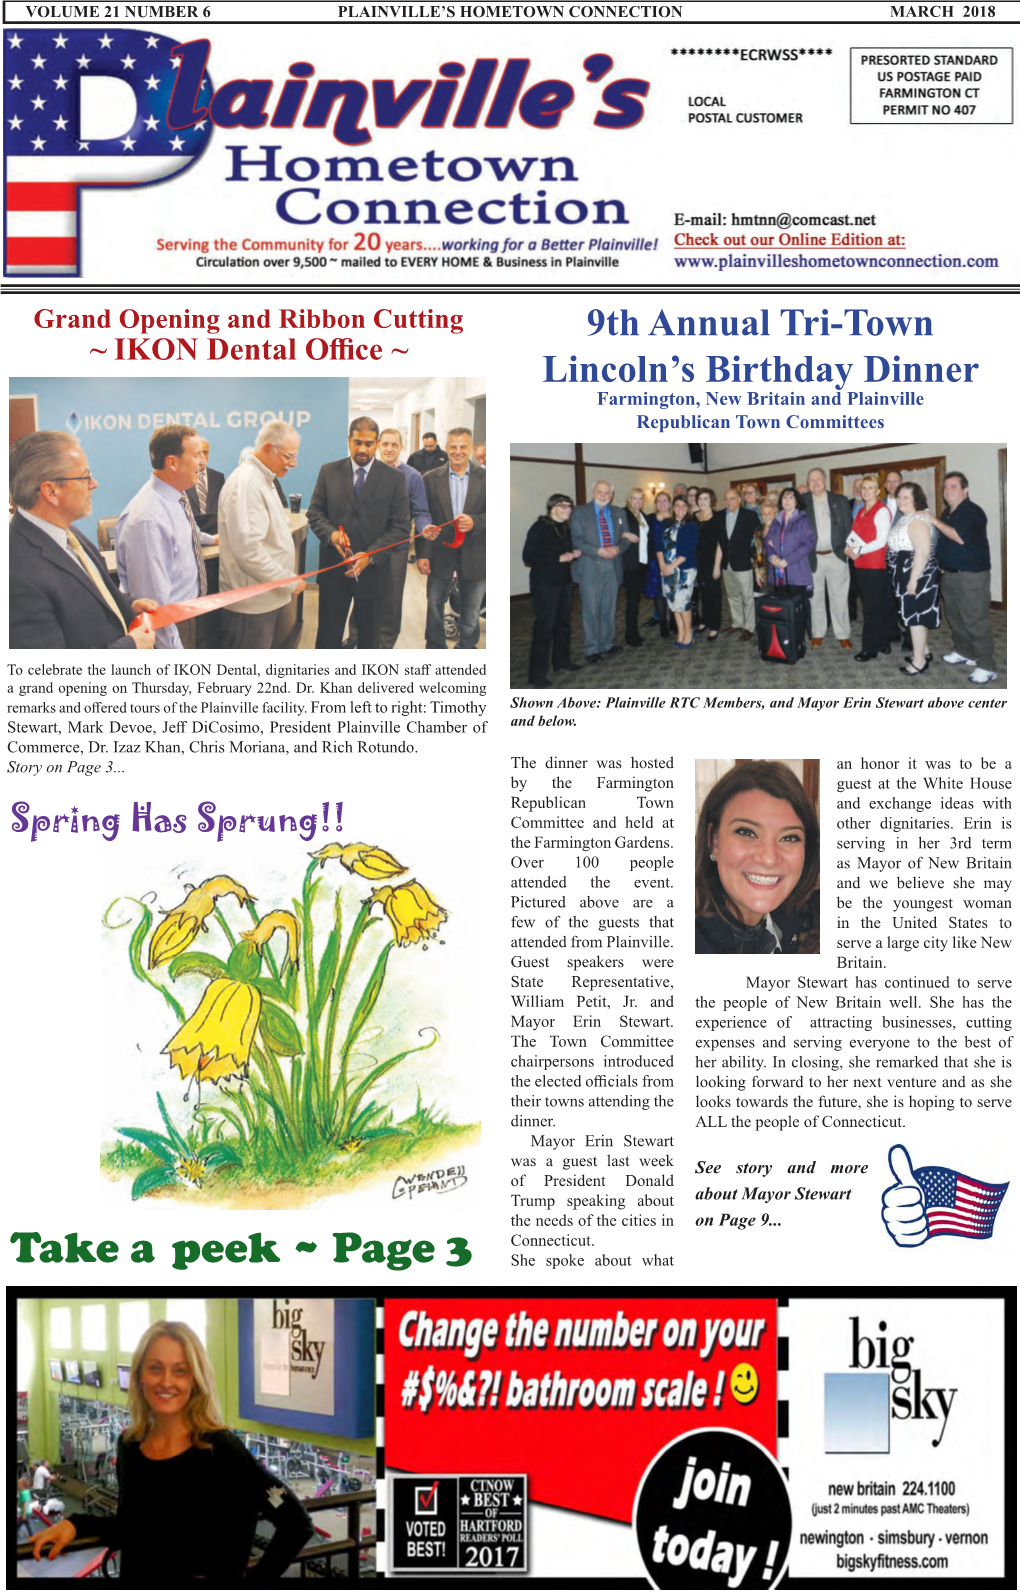 Take a Peek ~ Page 3 She Spoke About What PAGE 2 PLAINVILLE’S HOMETOWN CONNECTION MARCH 2018